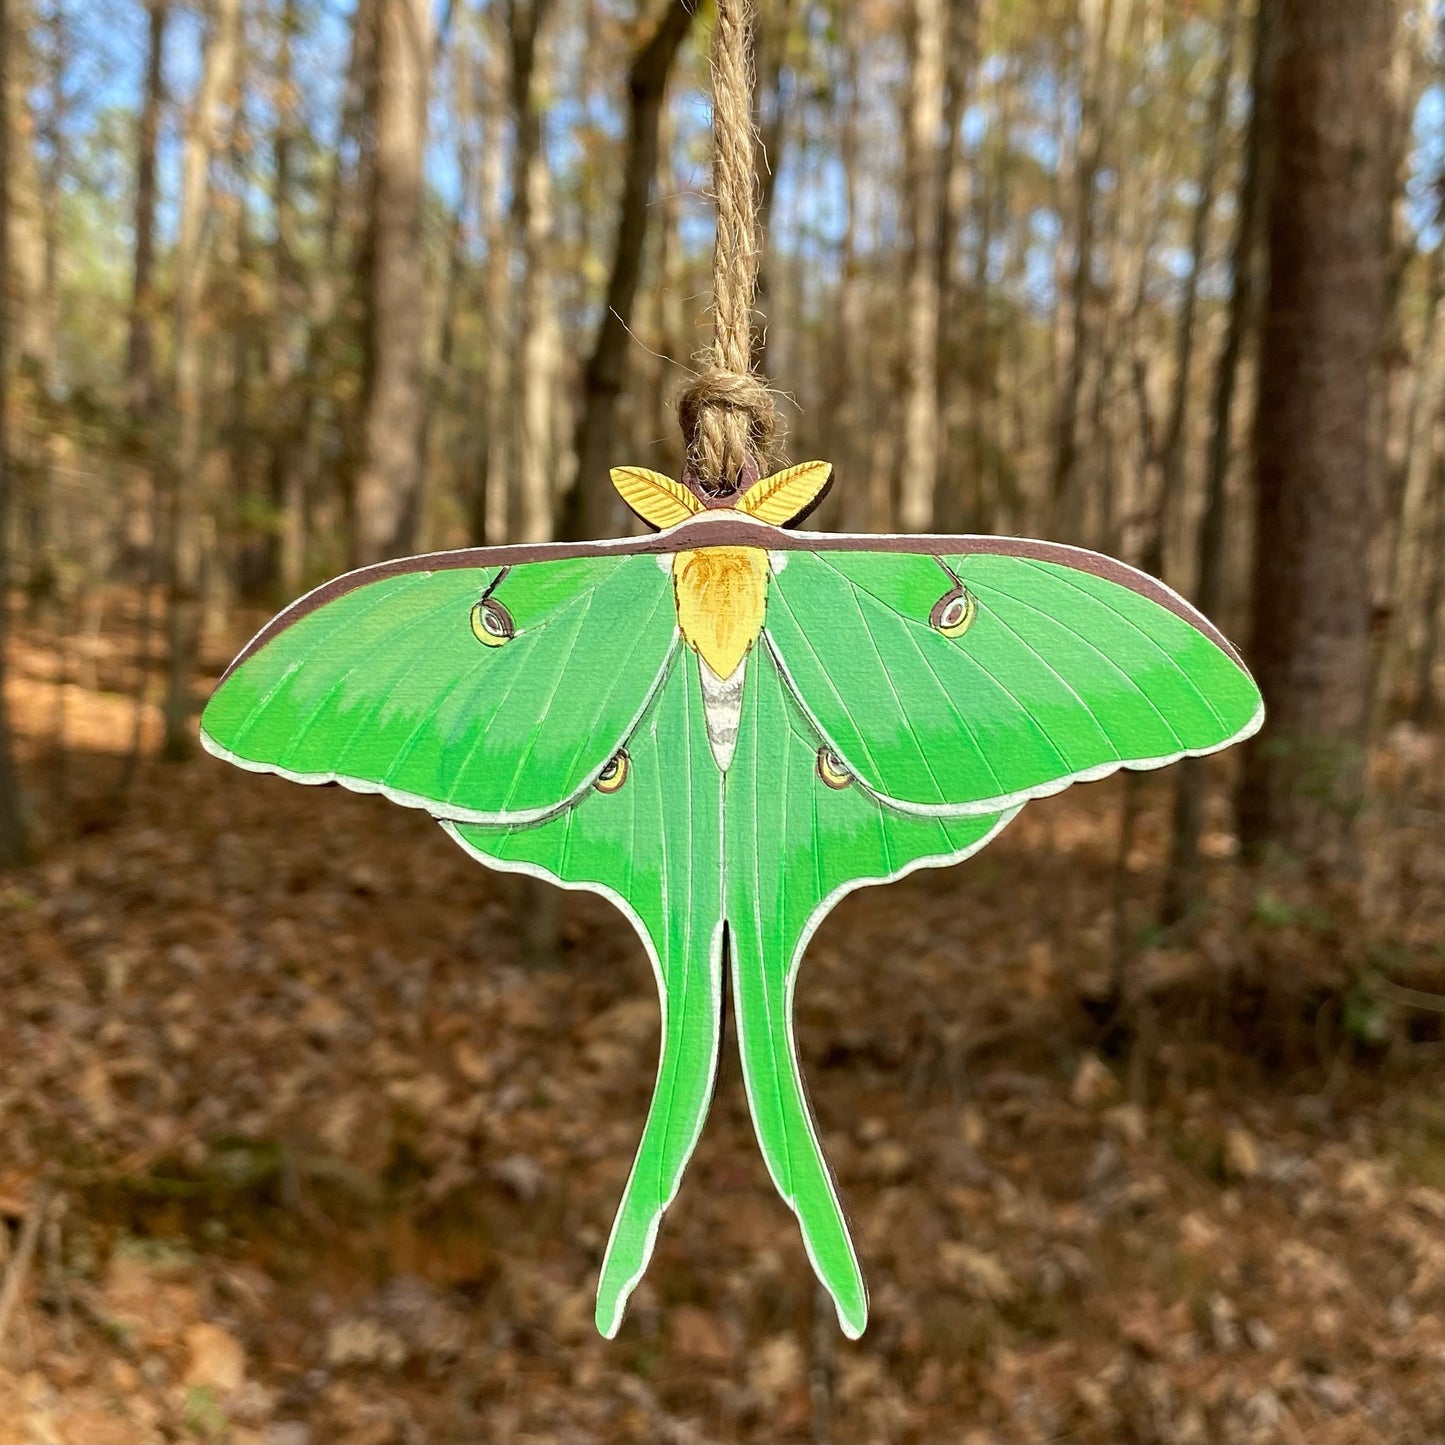 Luna Moth with Wings Spread Hand-painted Ornament